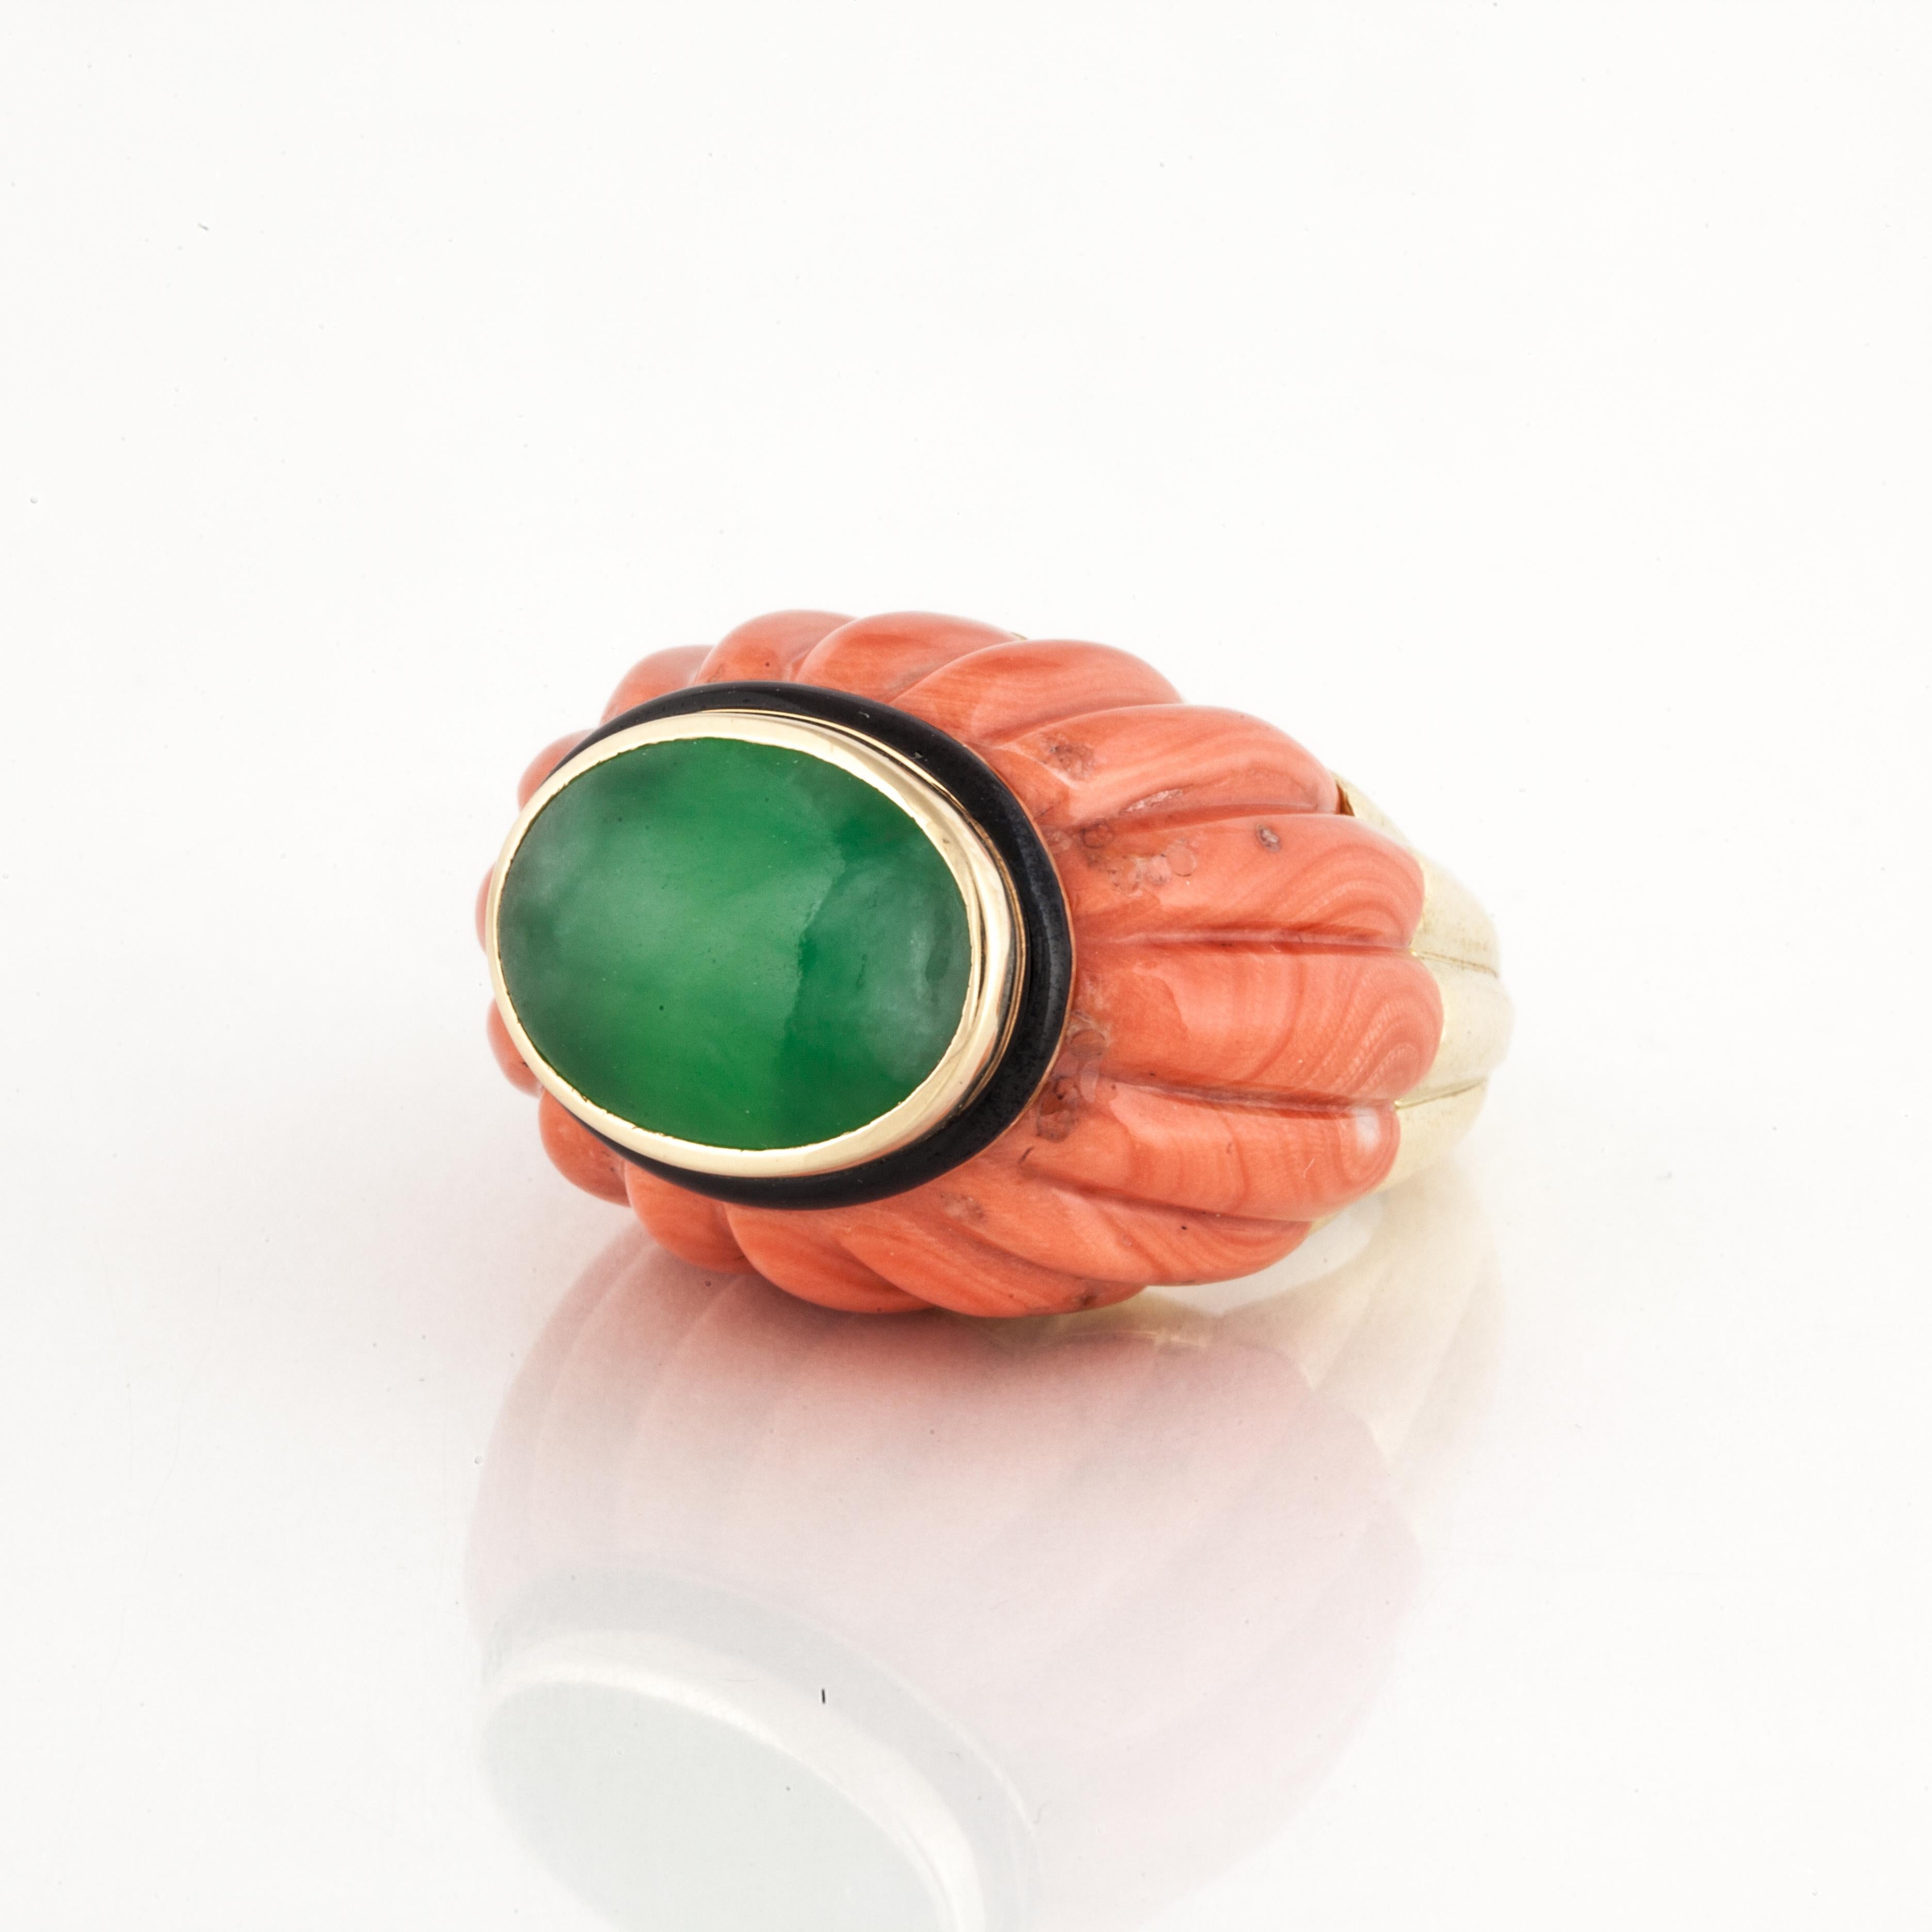 18K yellow gold jade and coral ring by David Webb.  Features an oval polished piece of jade in the center.  Black enamel highlights the coral and jade.  The base of the ring is a single piece of carved coral.  Ring is currently a size 6 with a